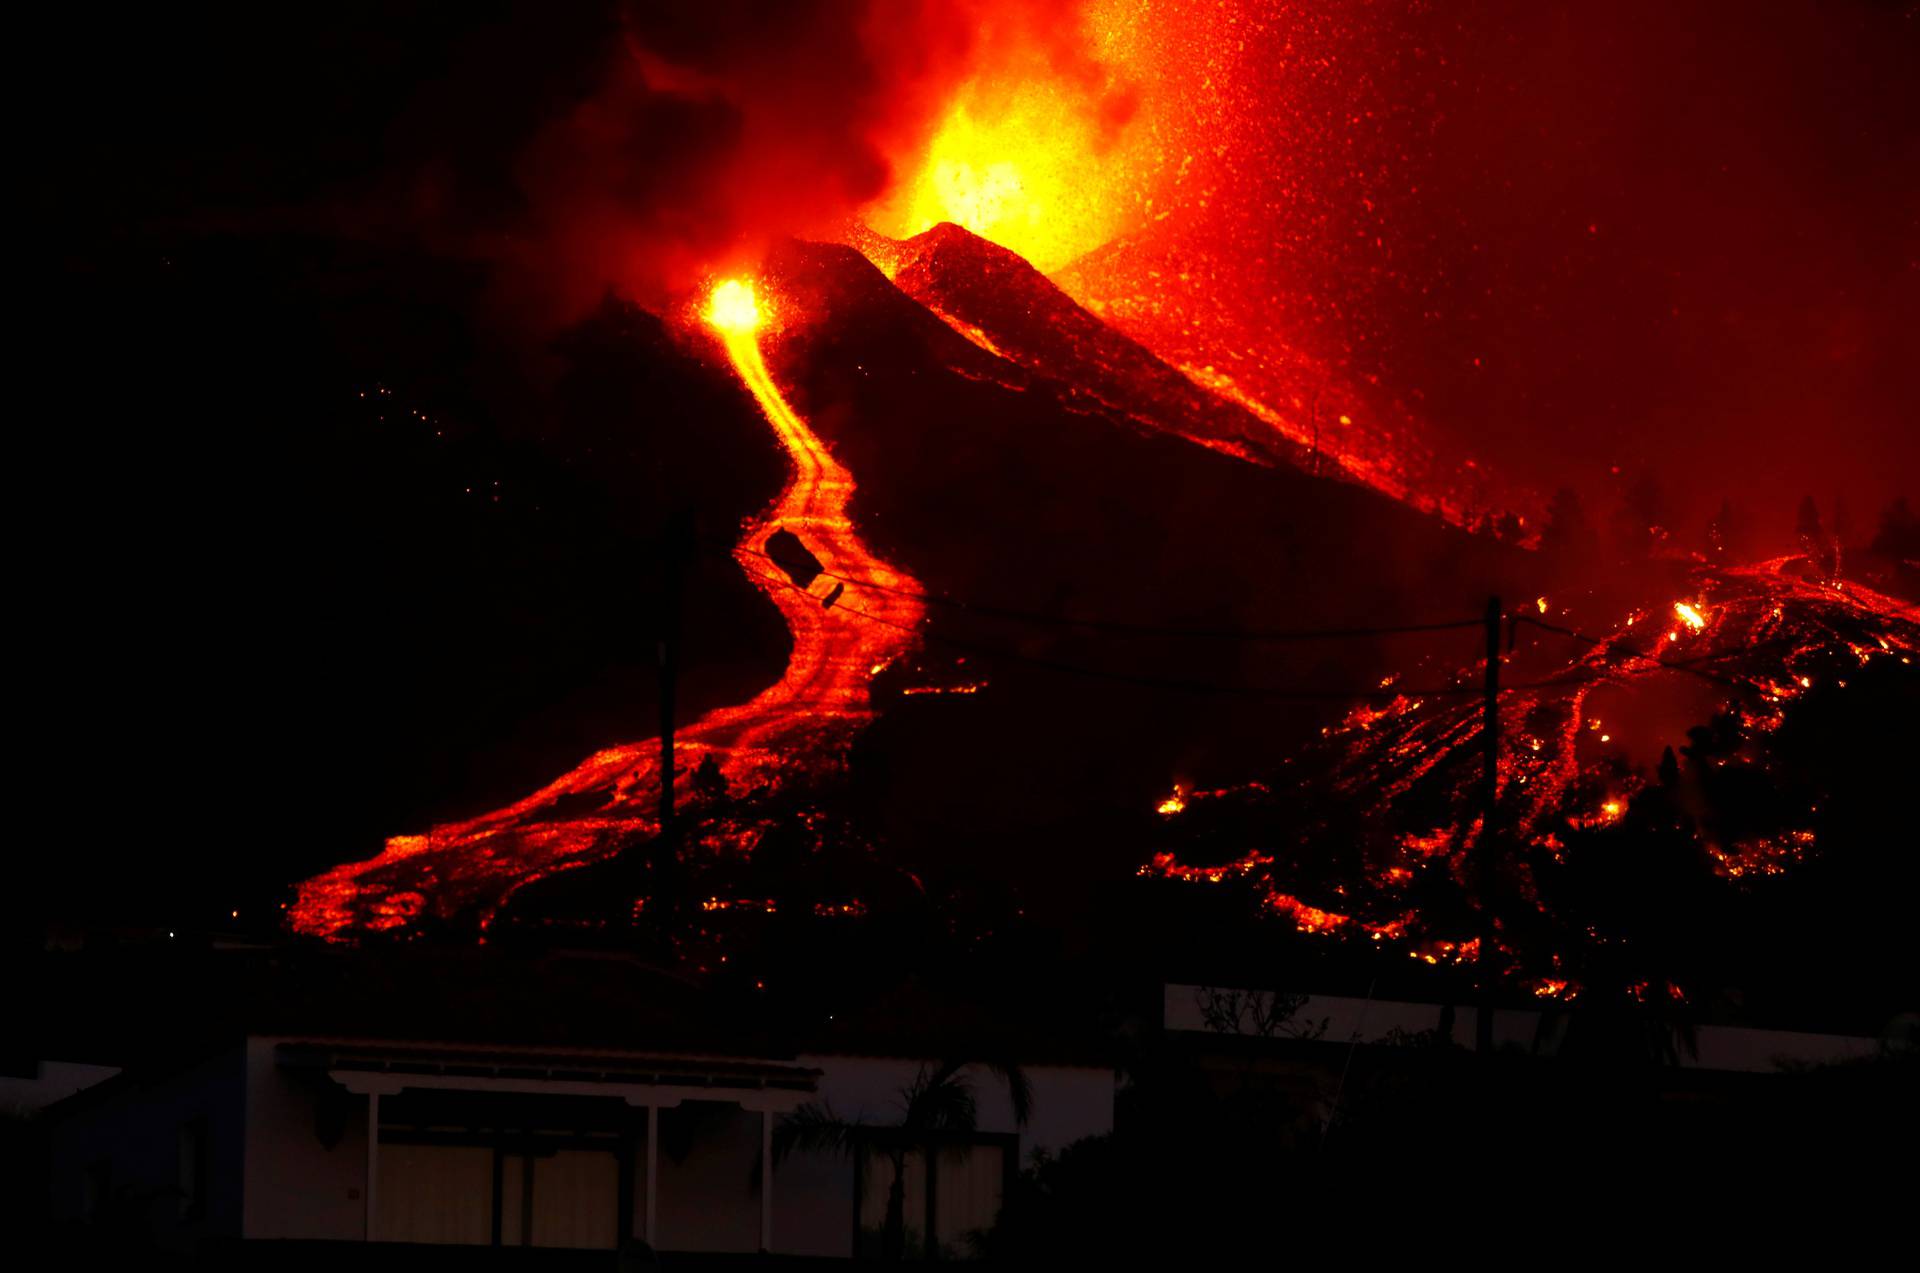 Lava flows next to a housefollowing the eruption of a volcano in Spain